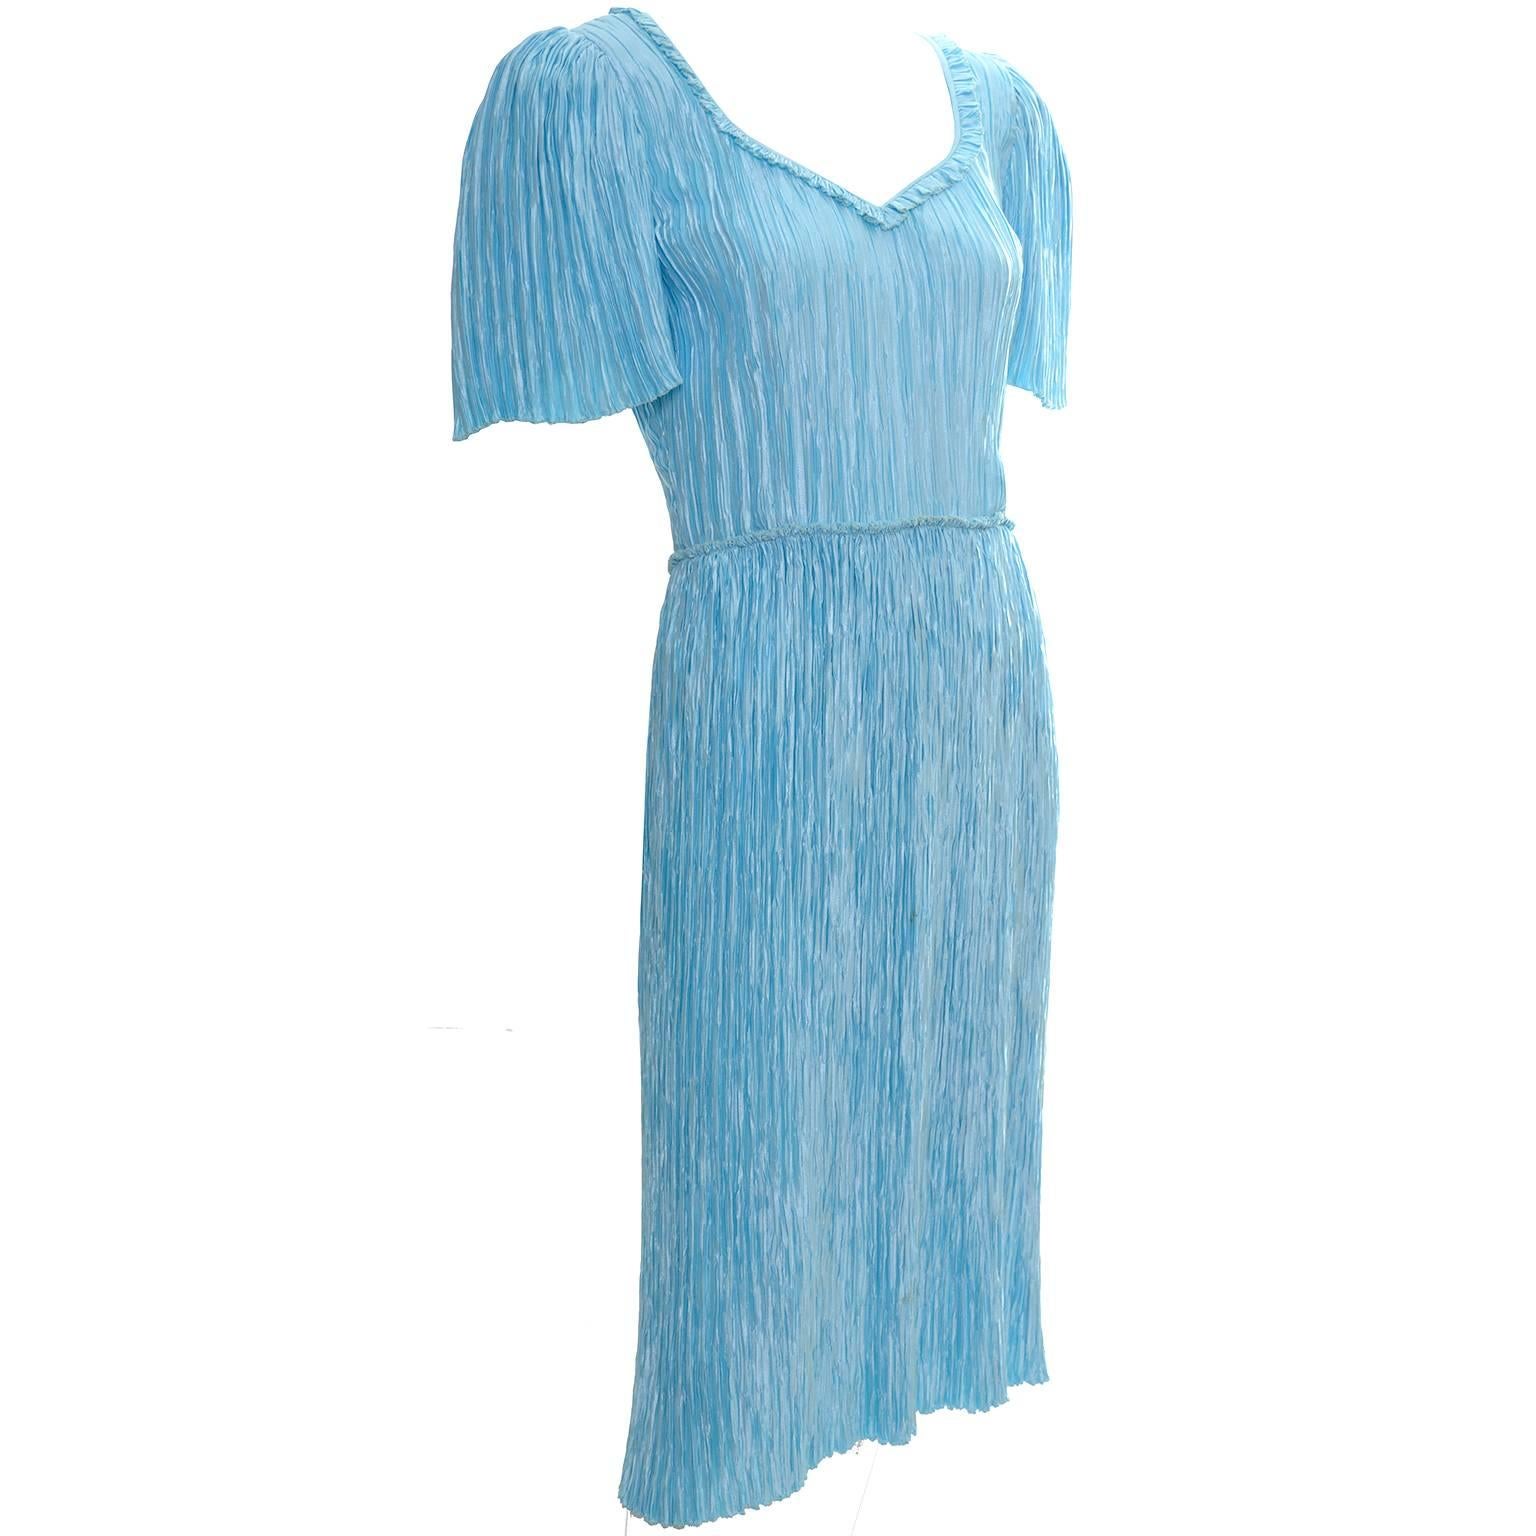 Mary McFadden Couture Vintage Dress Blue Fortuny Style Pleats in Size 4